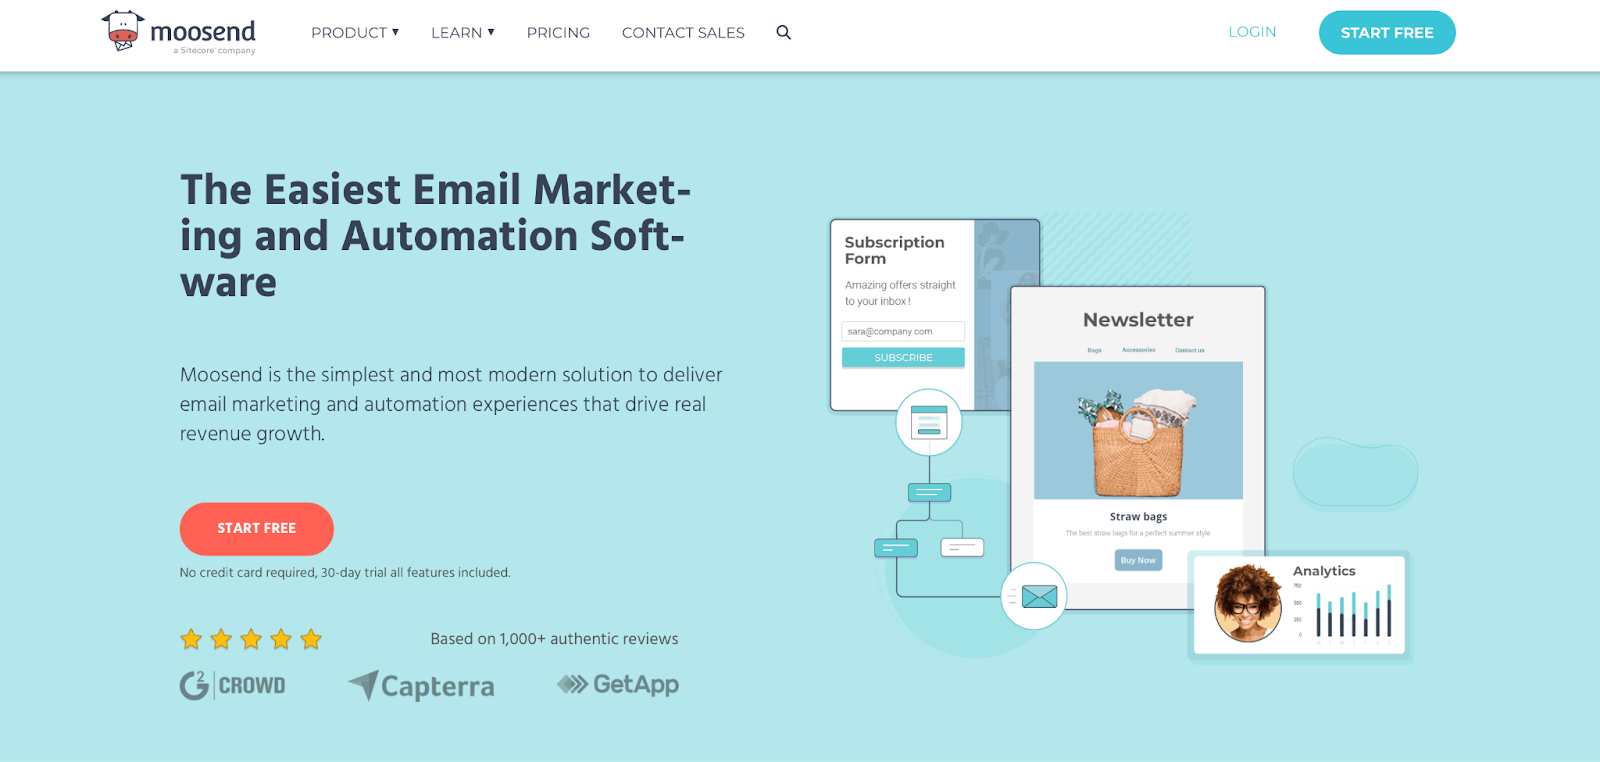 email marketing automation tool - Moosend.